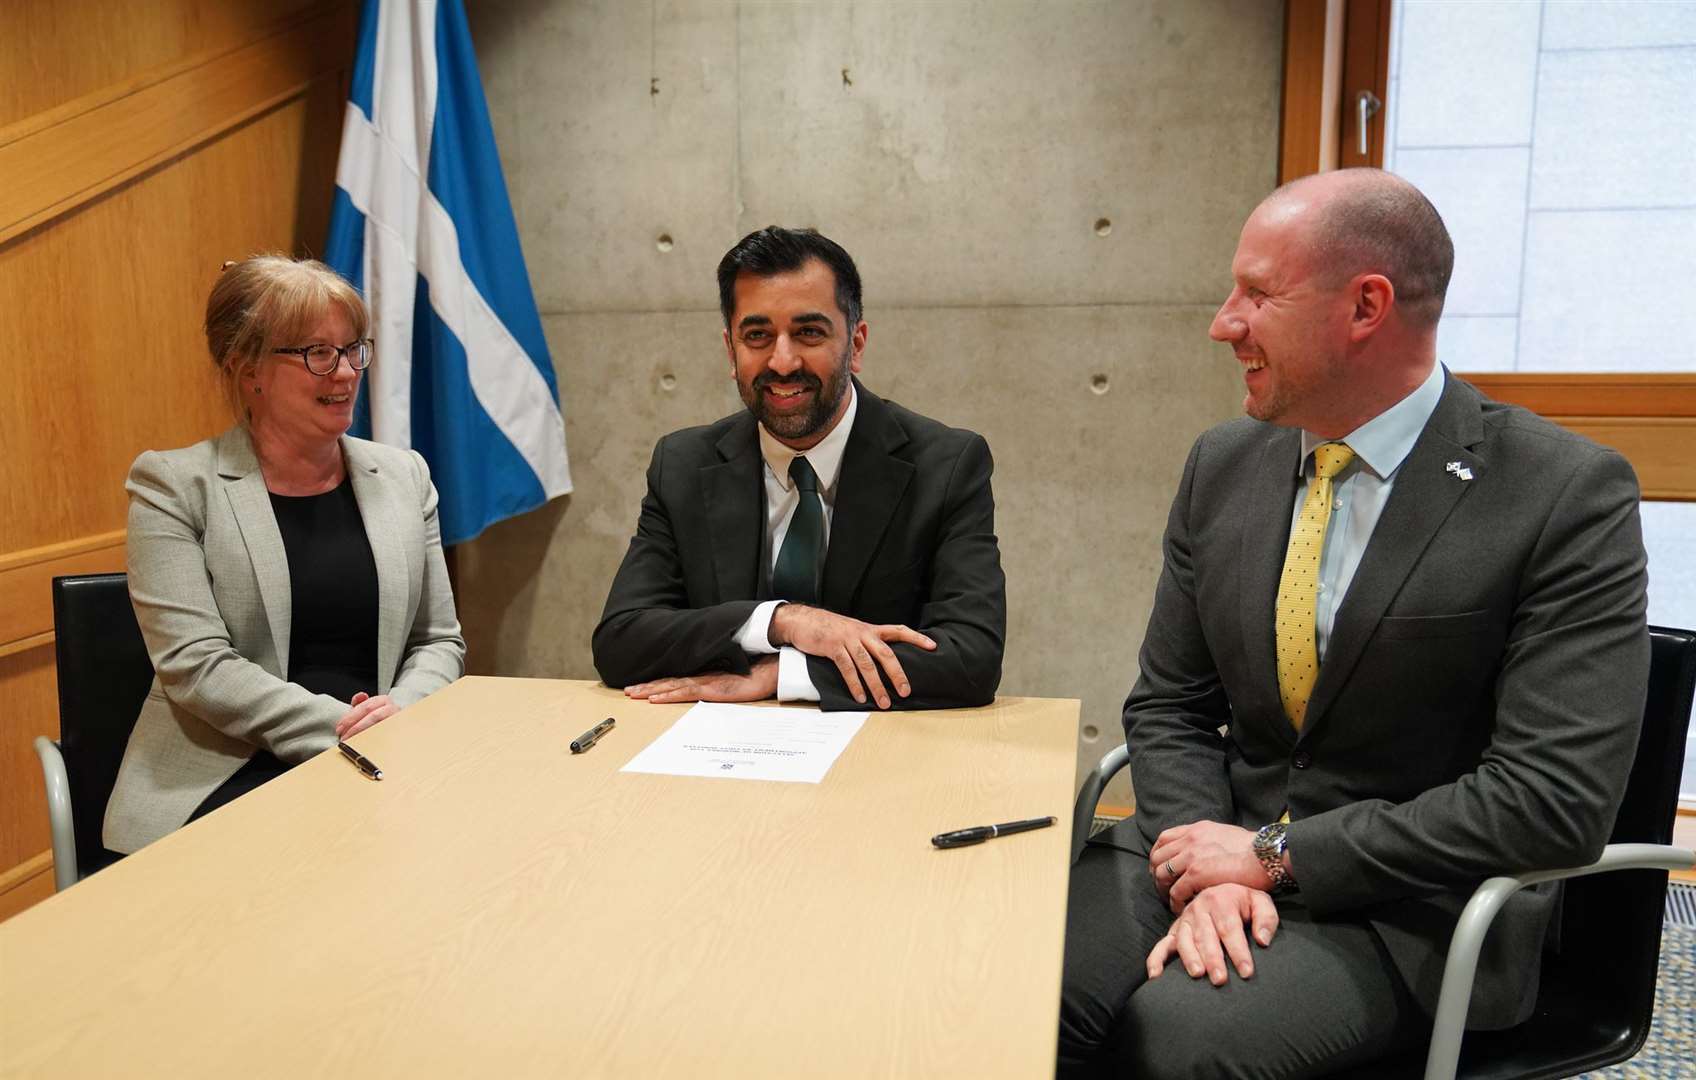 Humza Yousaf signs his nomination paper to become First Minister, nominated by Shona Robison and Neil Gray.